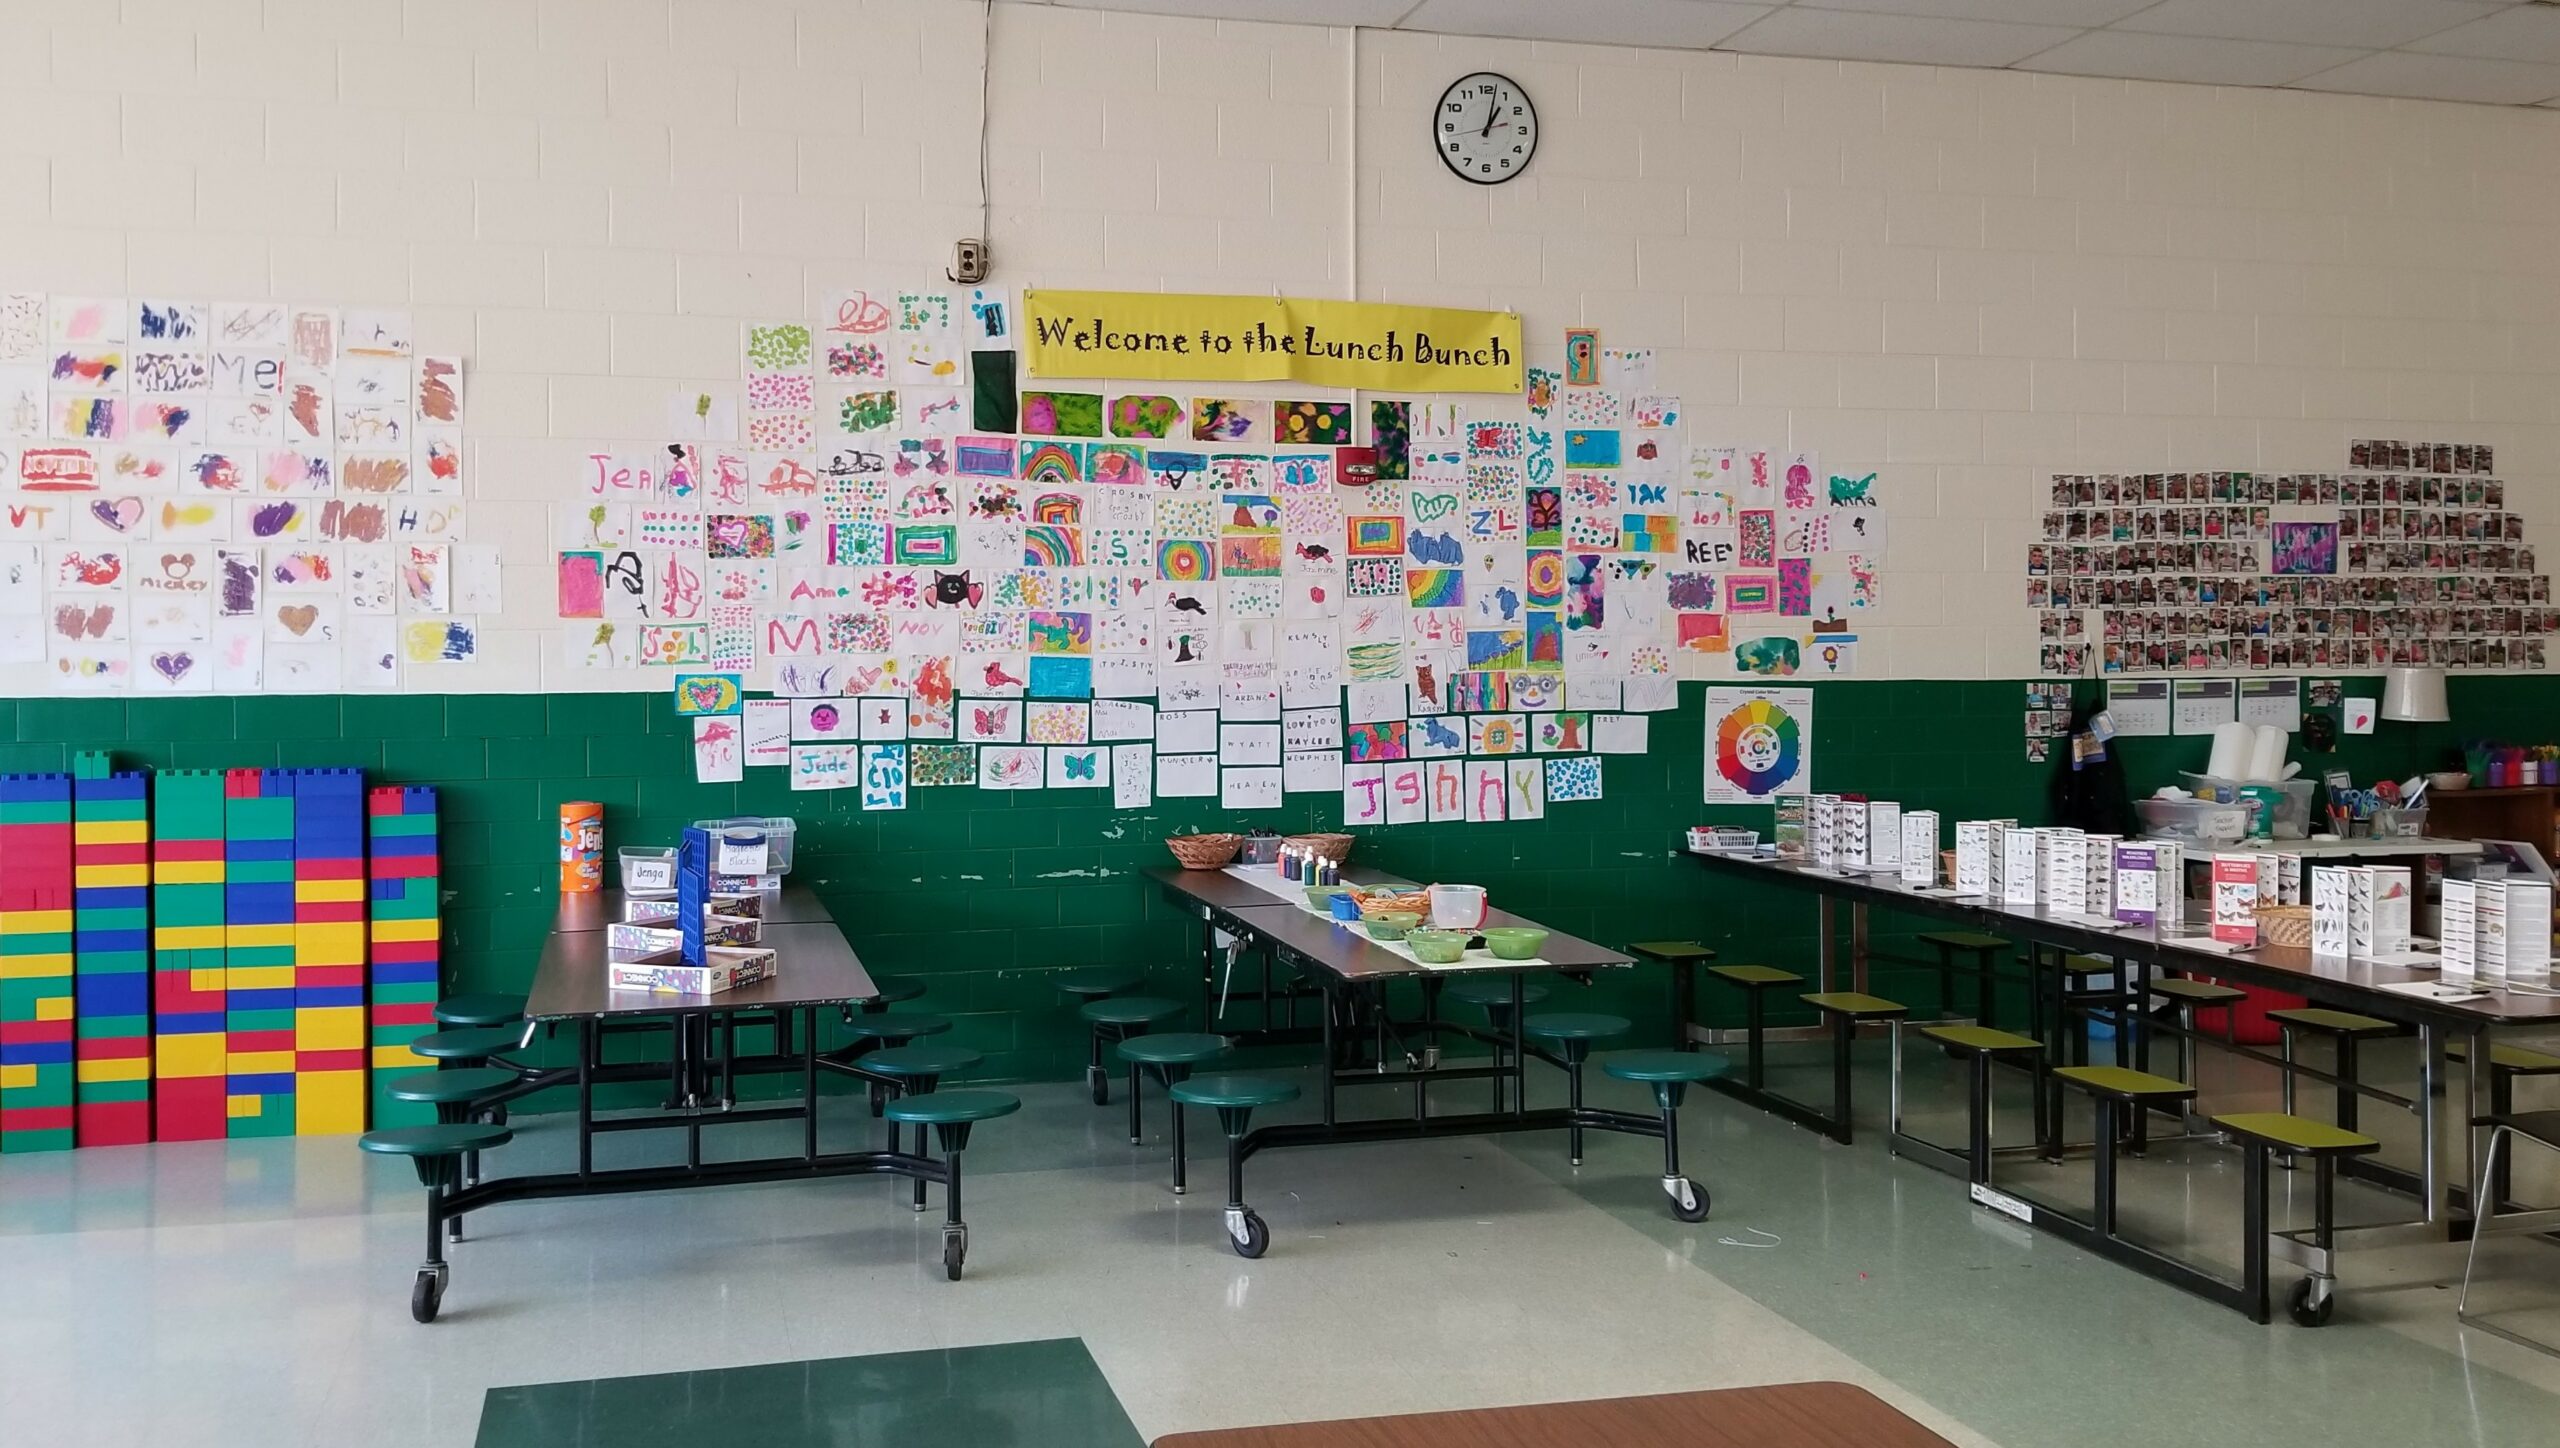 Cafeteria tables under display of student artwork